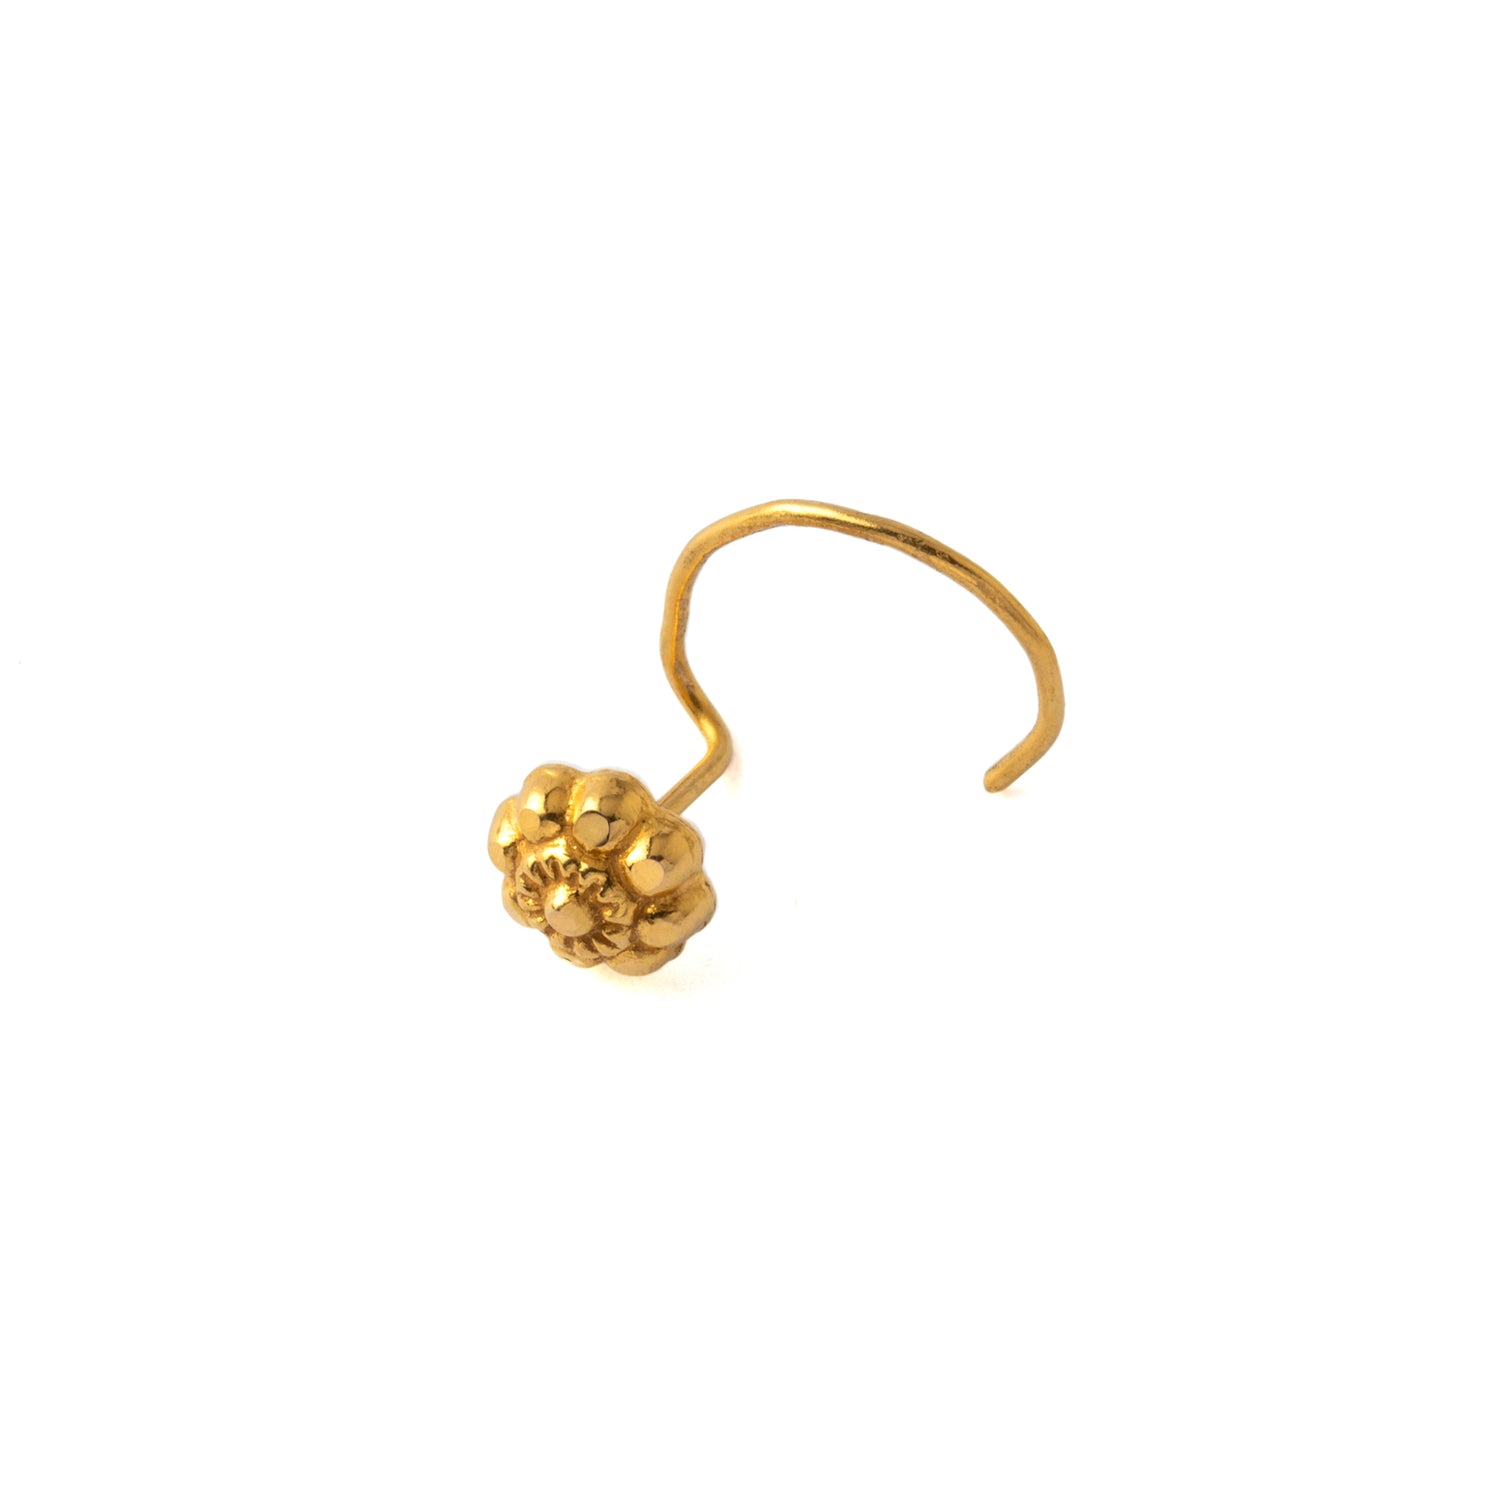 18K Gold Flower Nose Stud right side view